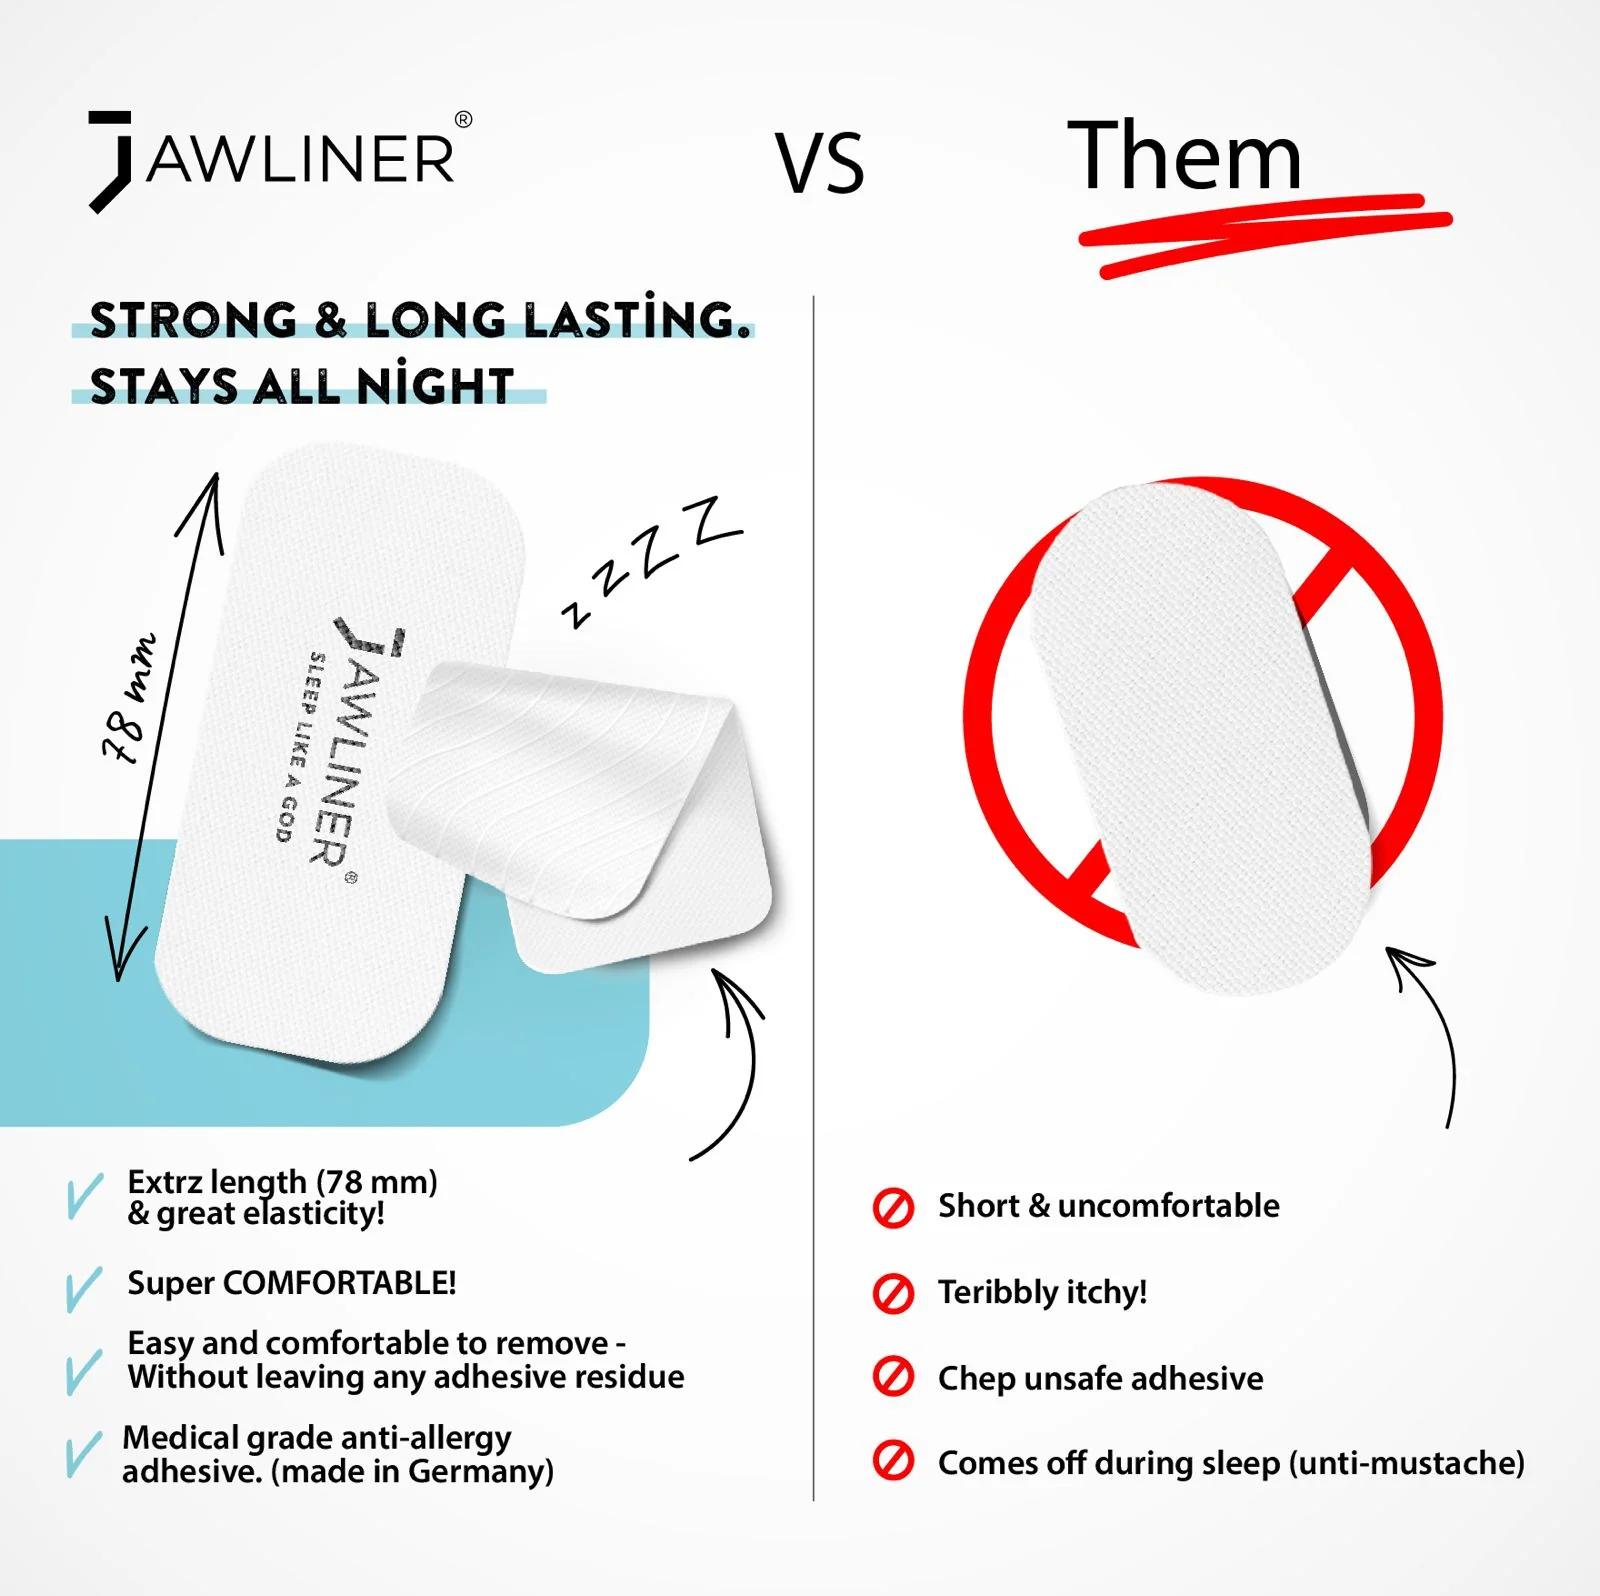 Jawliner mouth tape comparison with other mouth tape brands